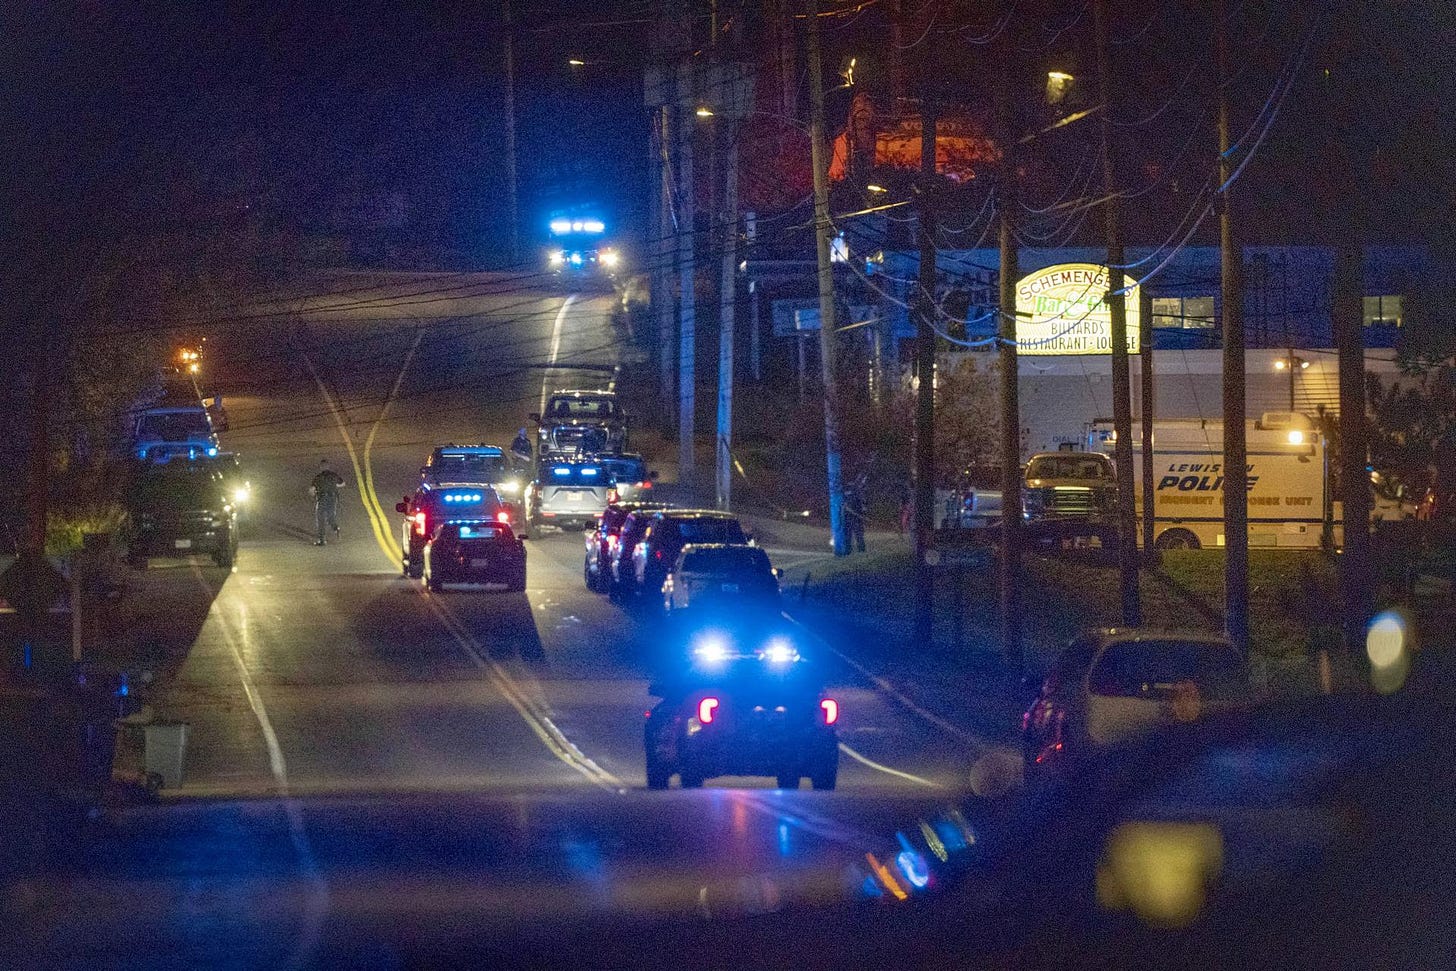 Police respond to an active shooter situation in Lewiston, Maine, on Wednesday.